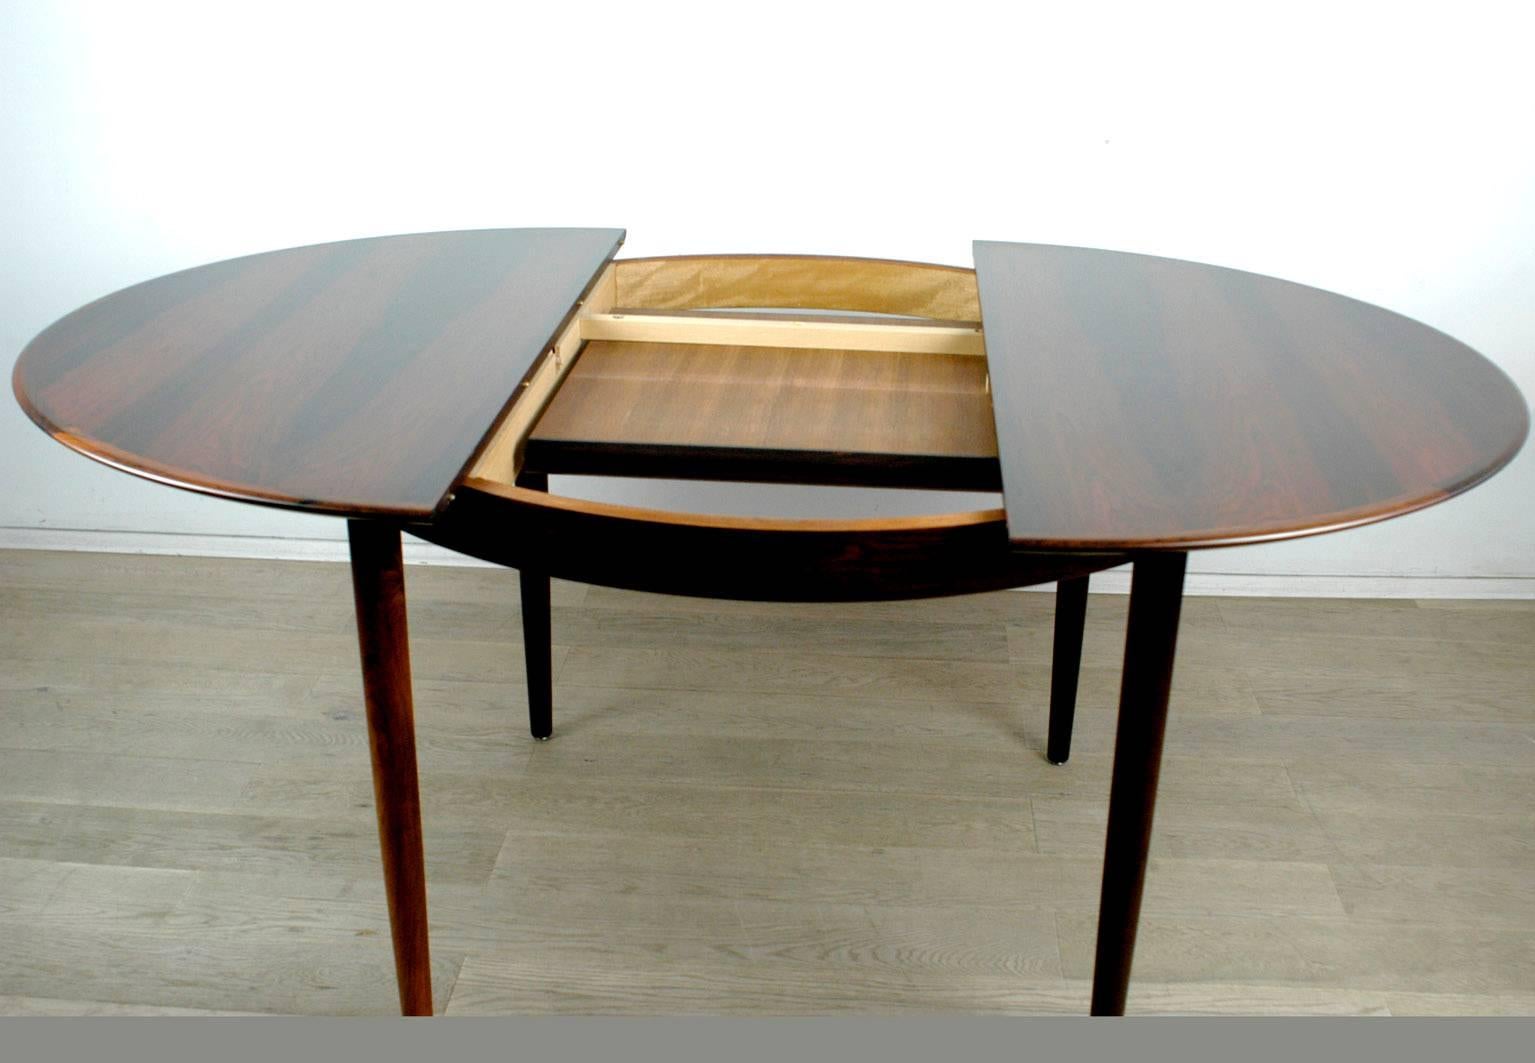 Circular Danish modern extendable dining table. Extensions are hidden under the table top and can be folded out easily.
 